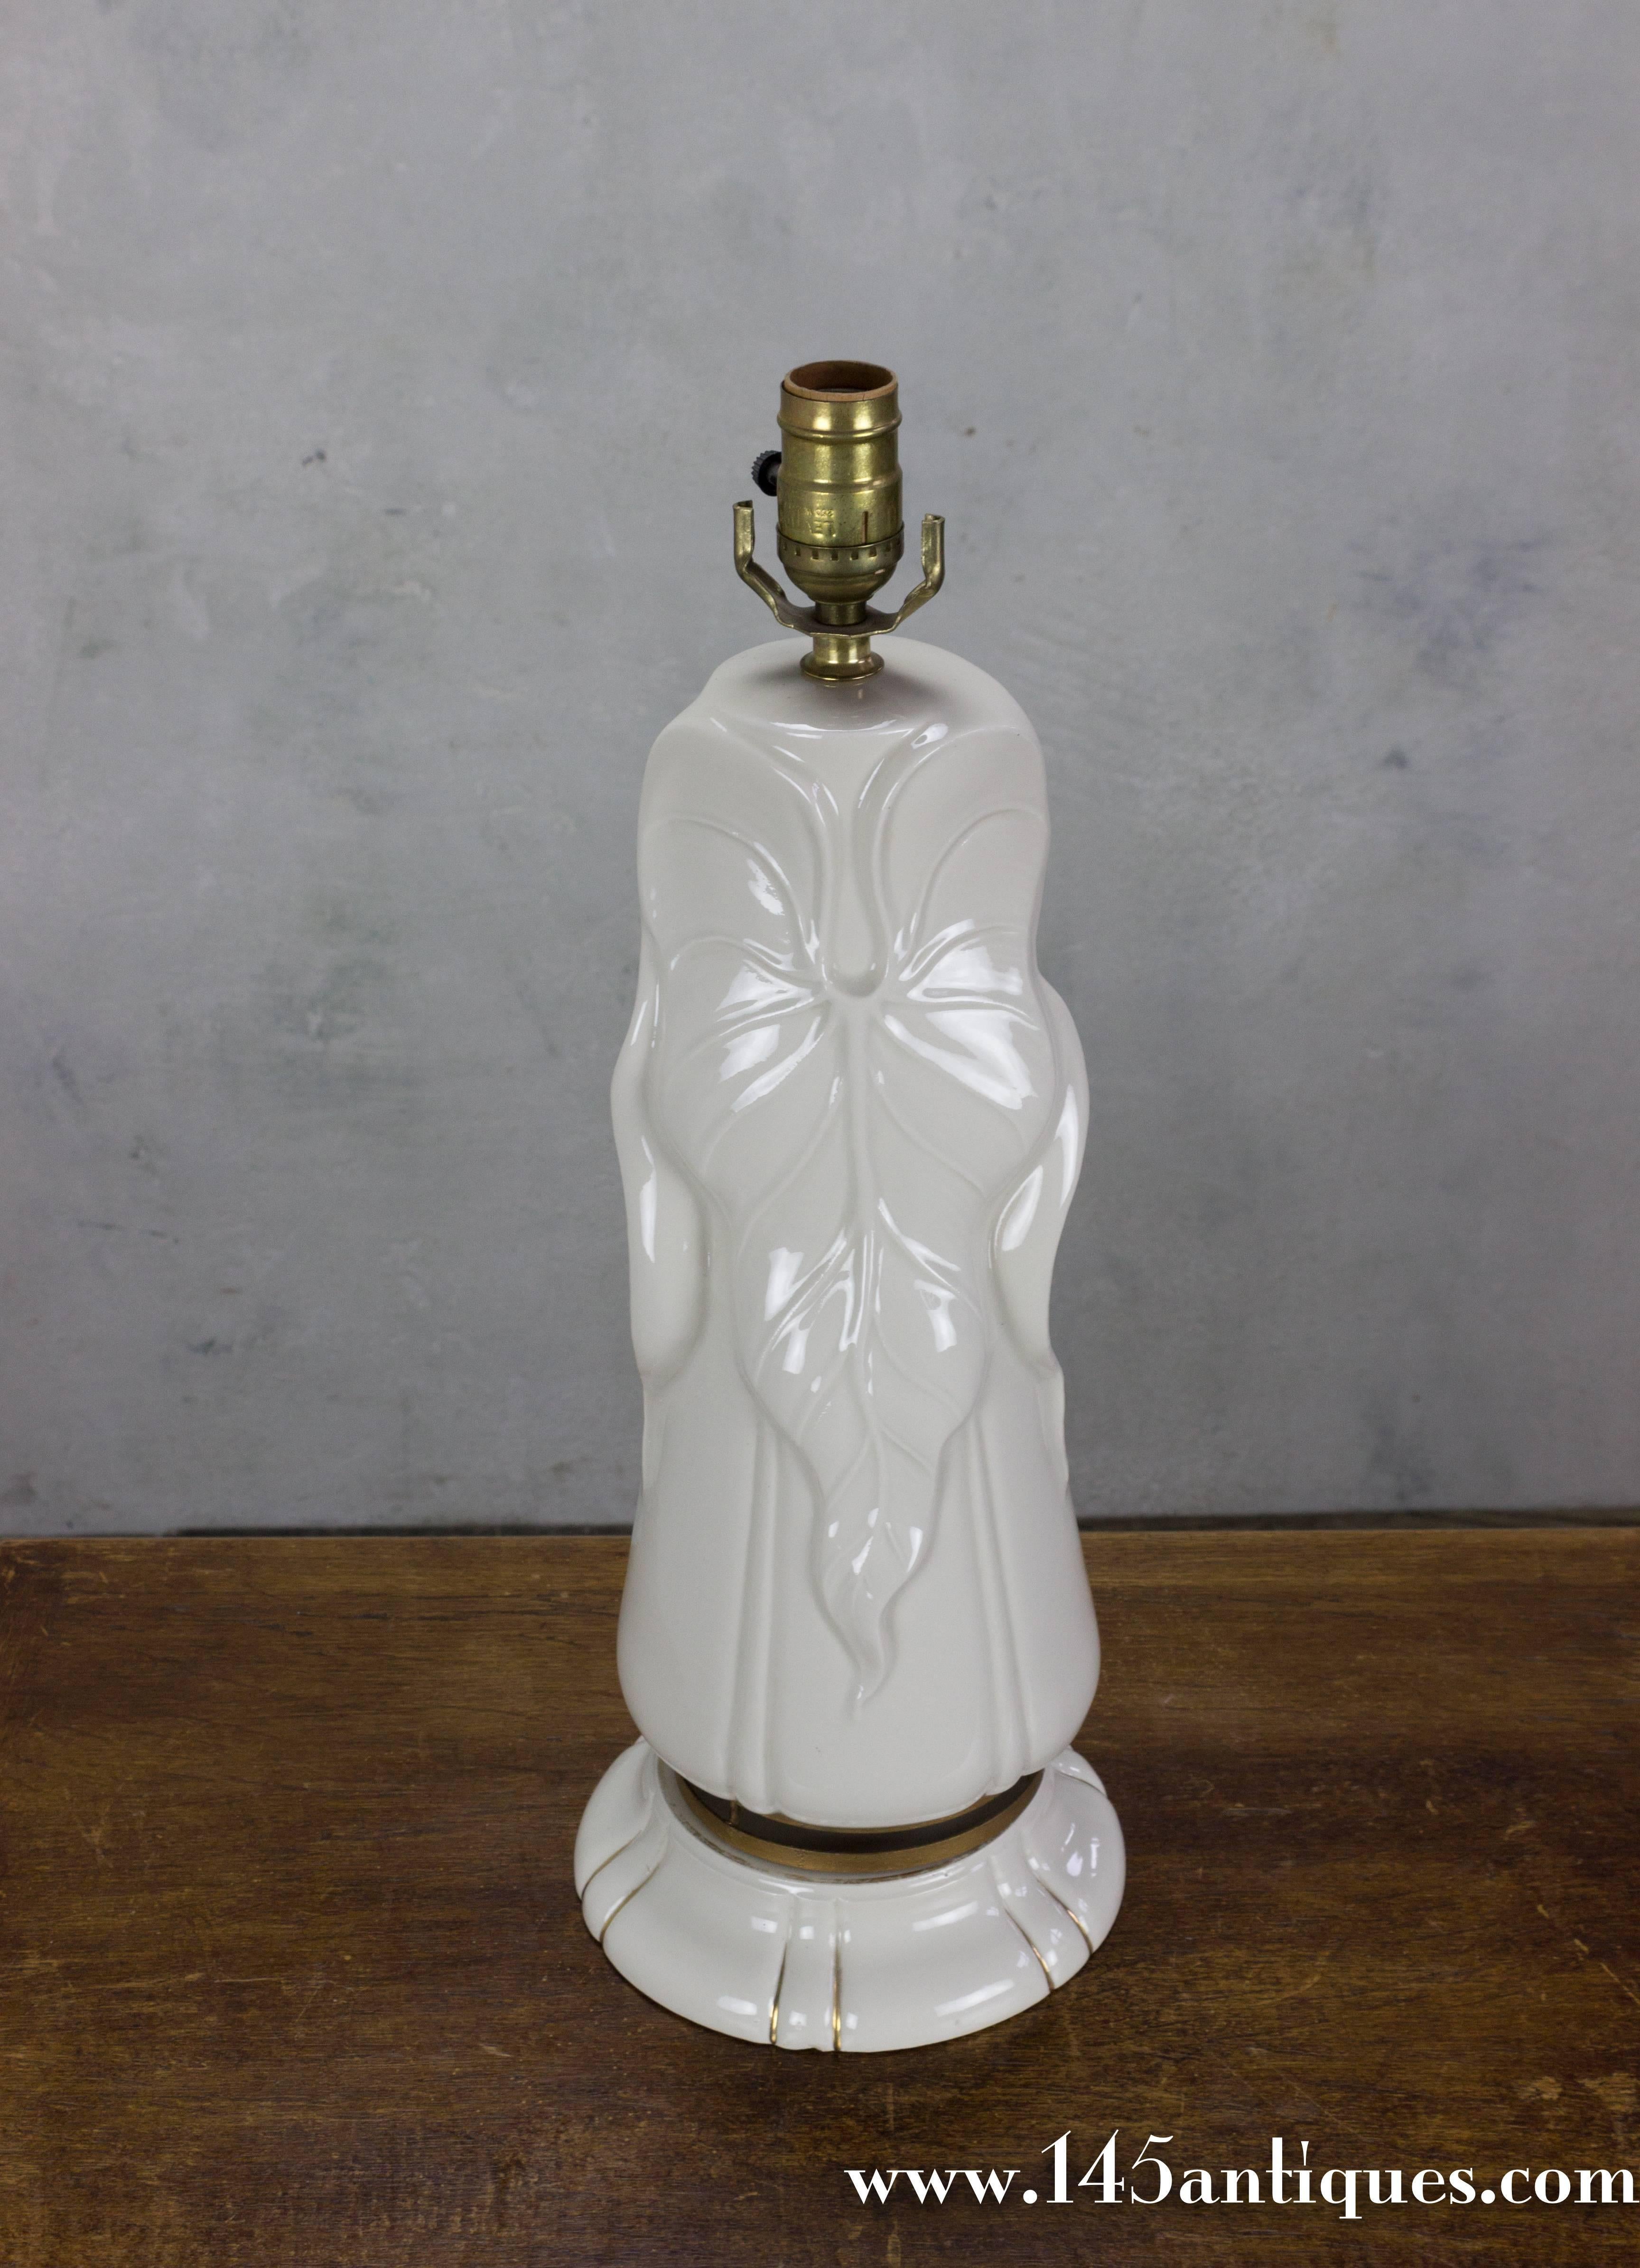 Pair of 1940s Hollywood Glam White Ceramic Lamps With Gold Metal Trim In Good Condition For Sale In Buchanan, NY